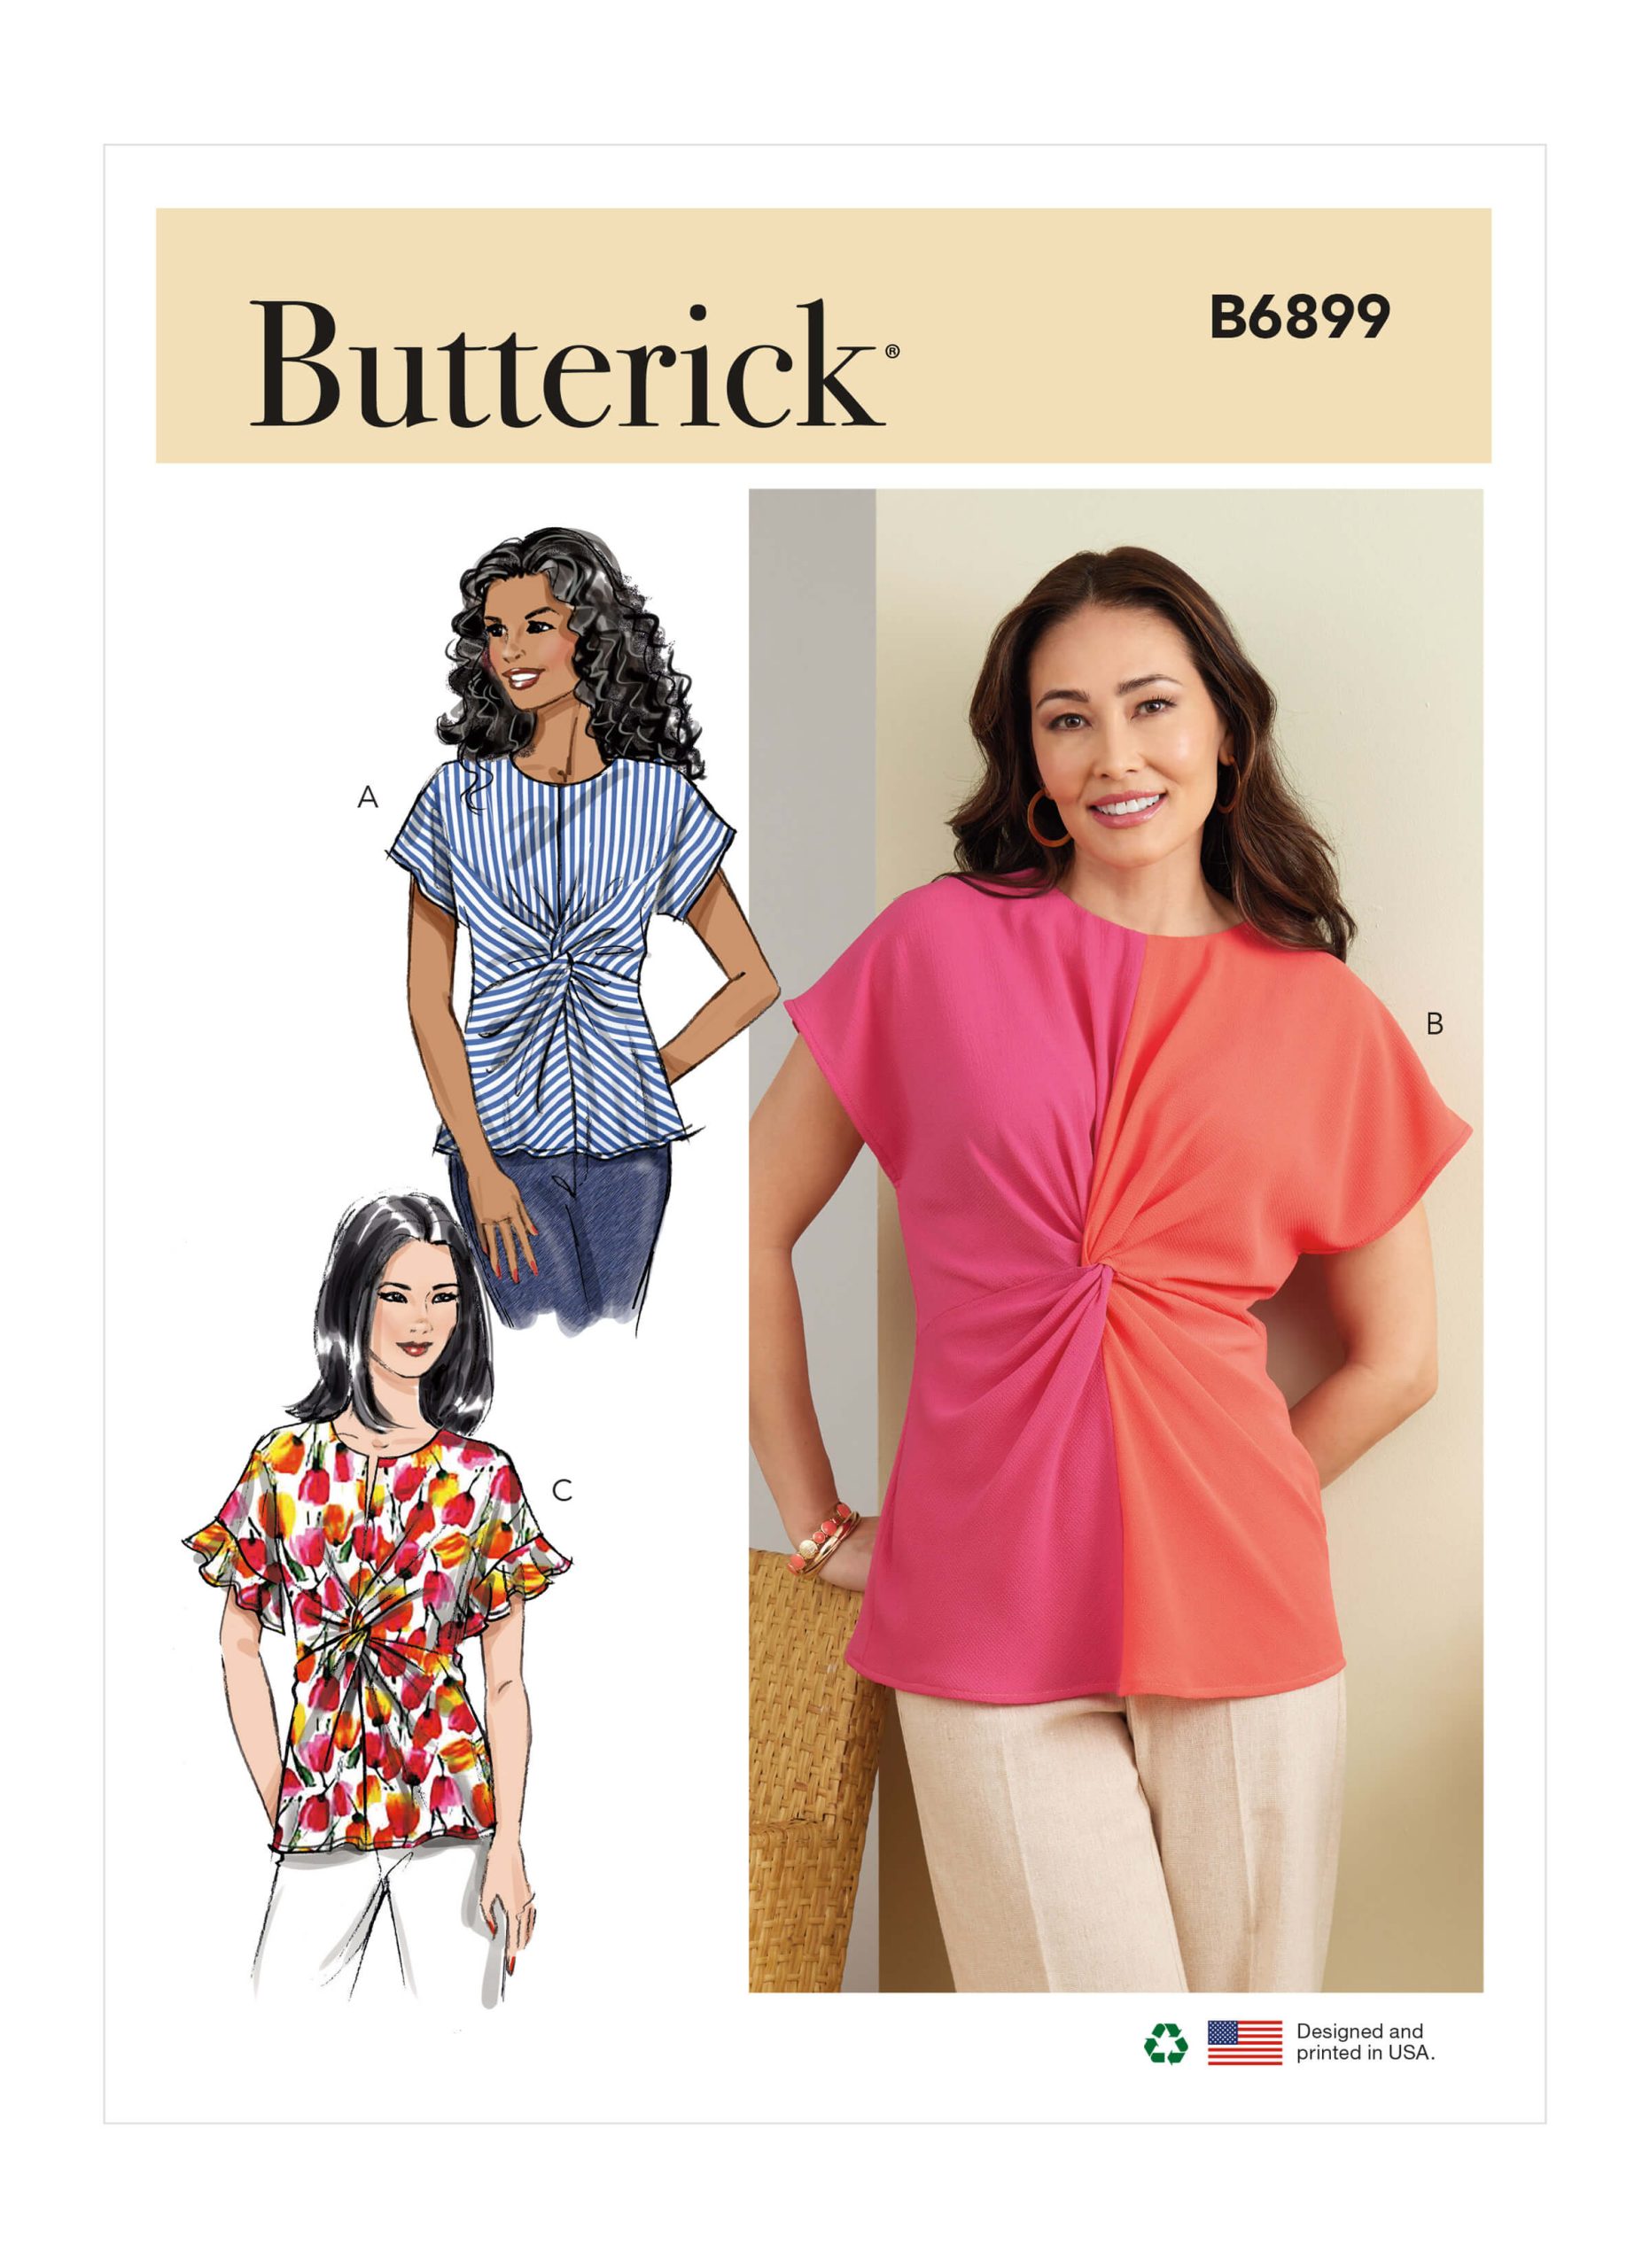 Butterick Sewing Pattern B6899 Misses' Top